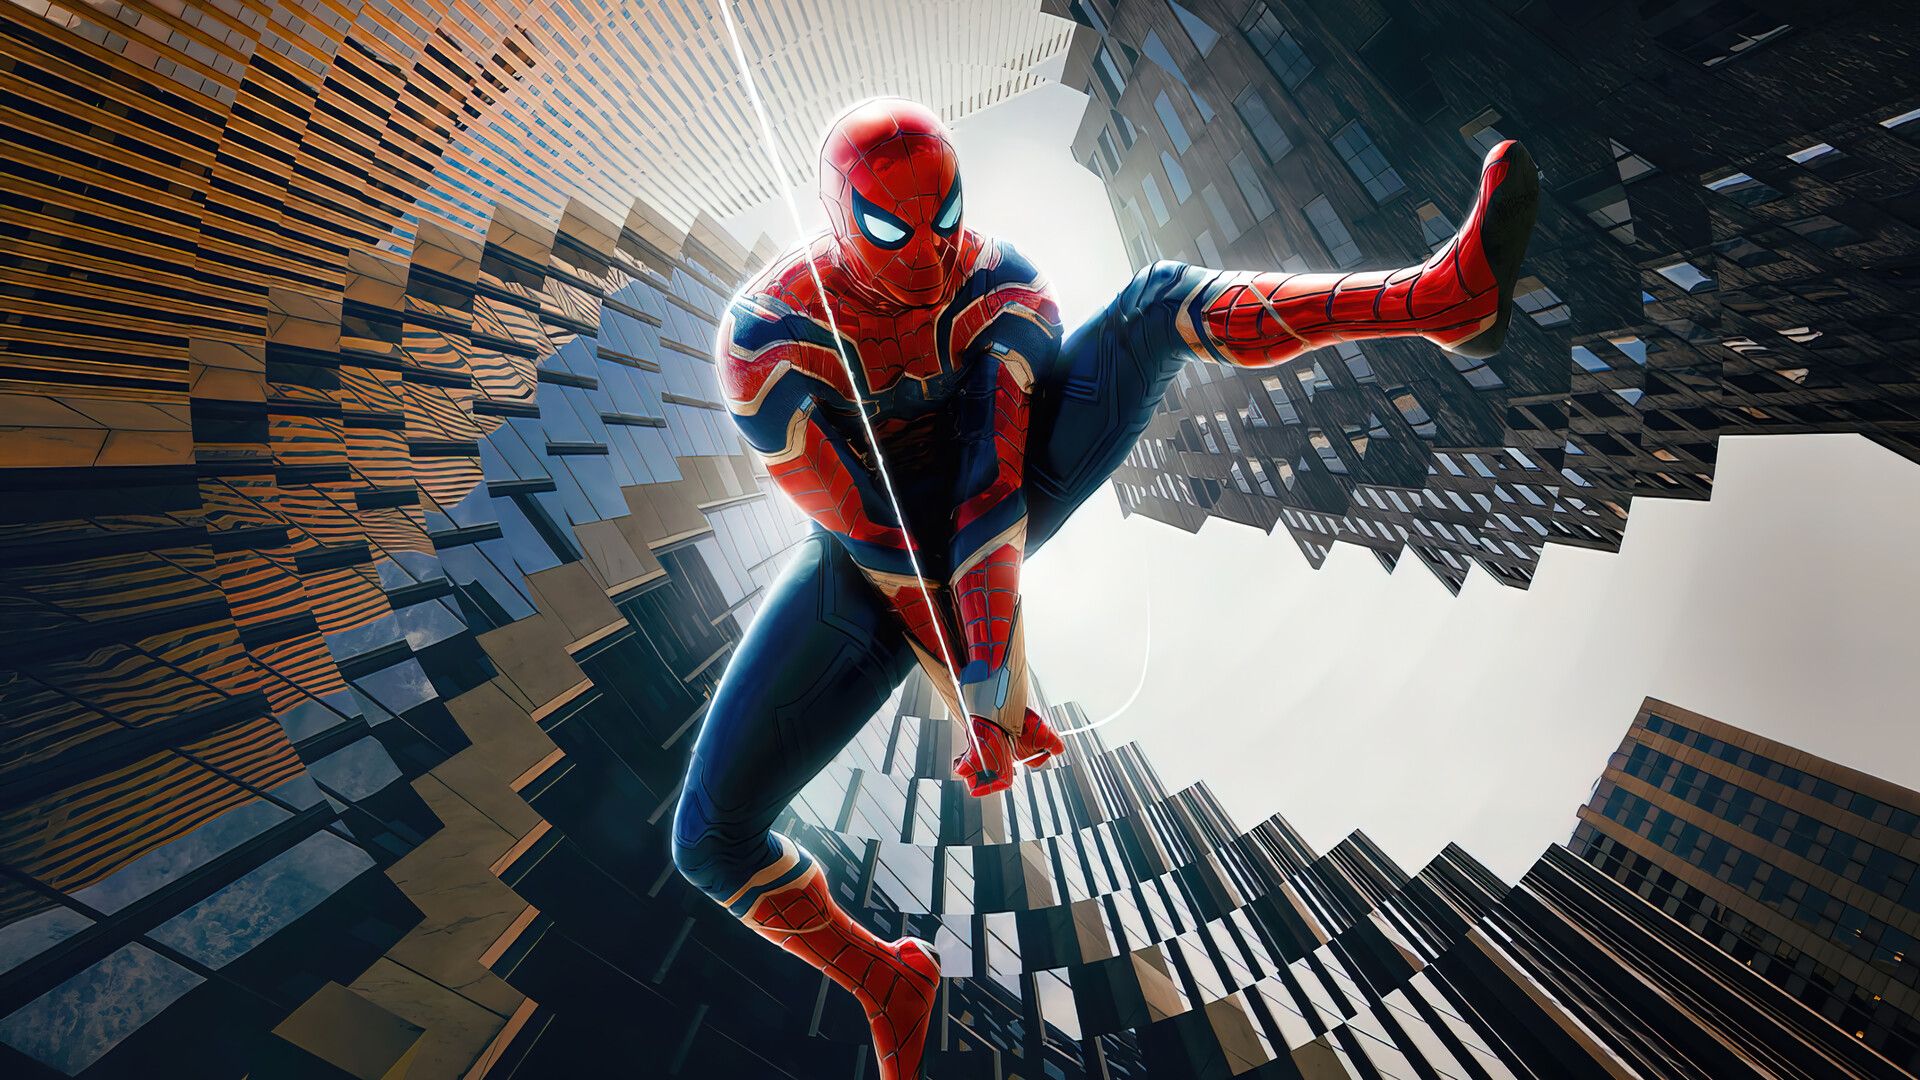 SpiderMan 4K wallpapers for your desktop or mobile screen free and easy to  download